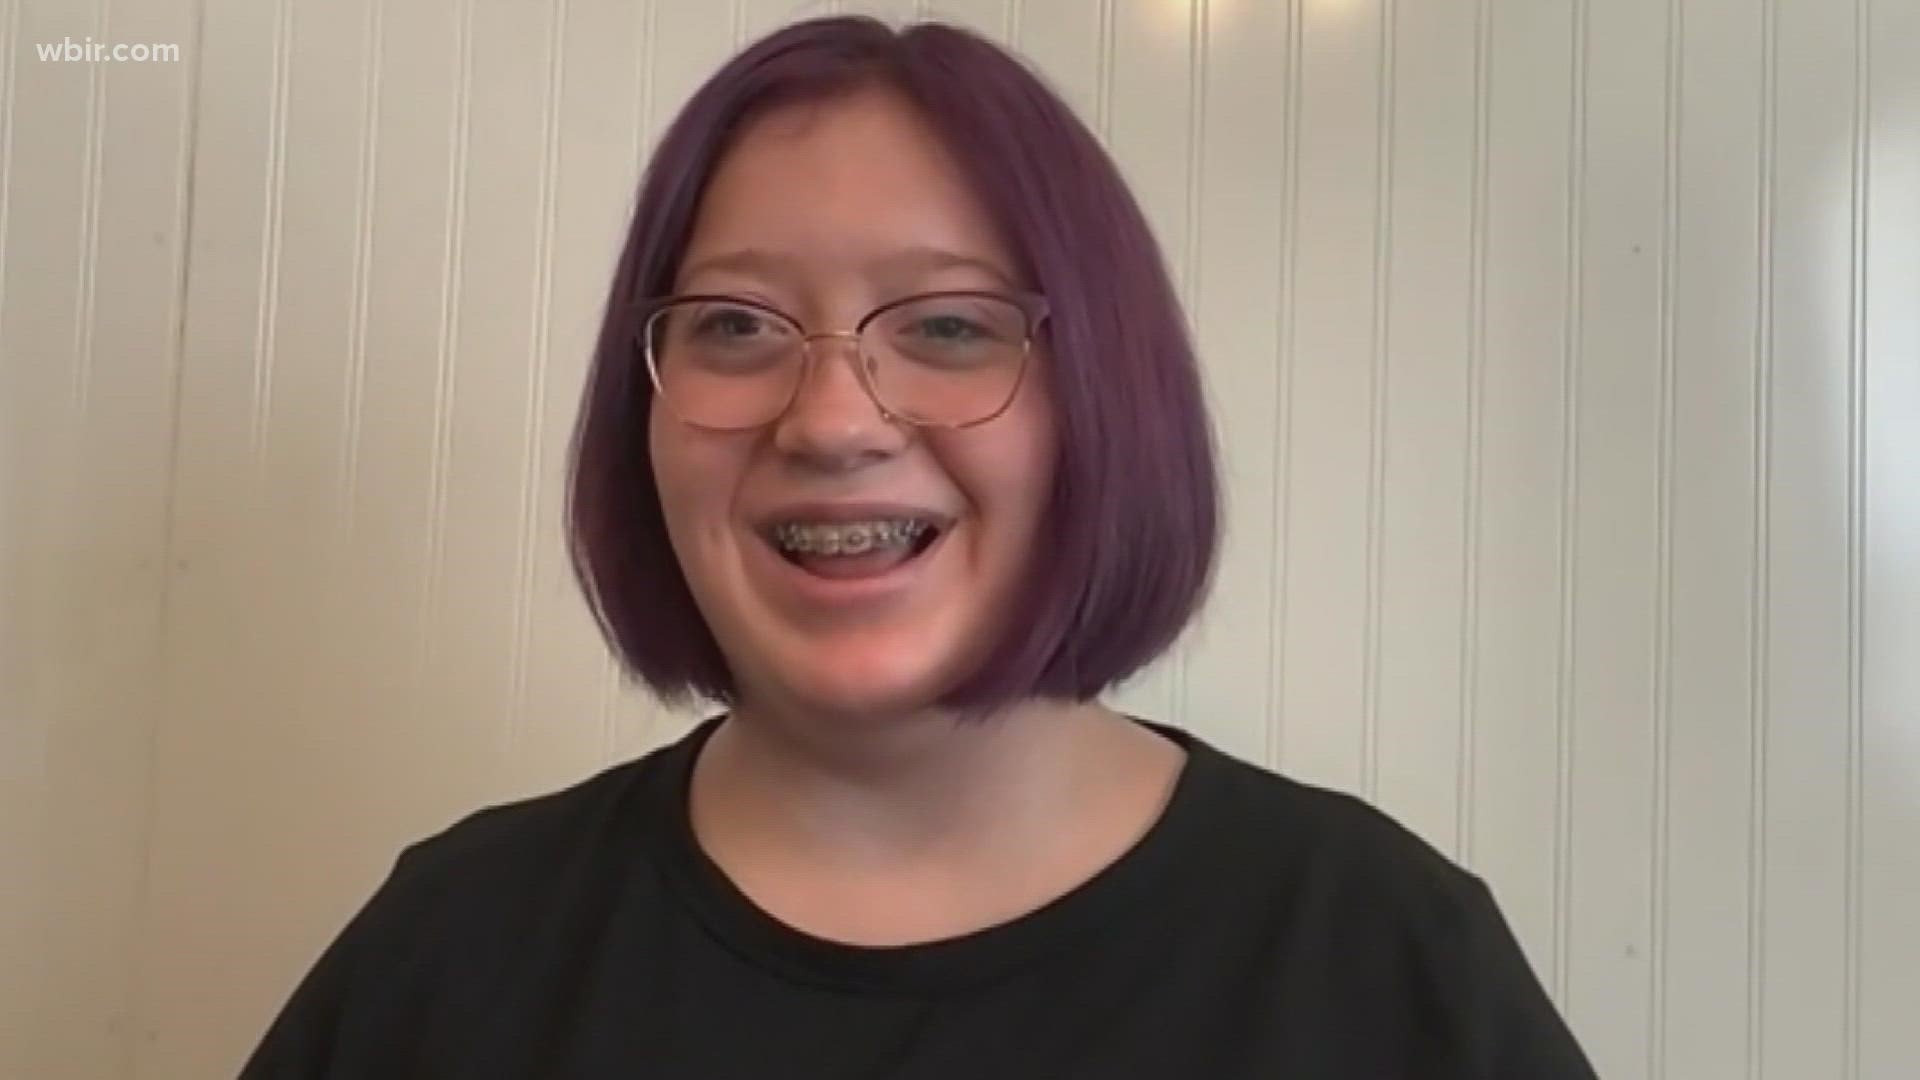 Katelyn Cook lives with Mosaic Down syndrome, but doesn't see it as a setback. Instead, she's raising awareness for those living with disabilities.